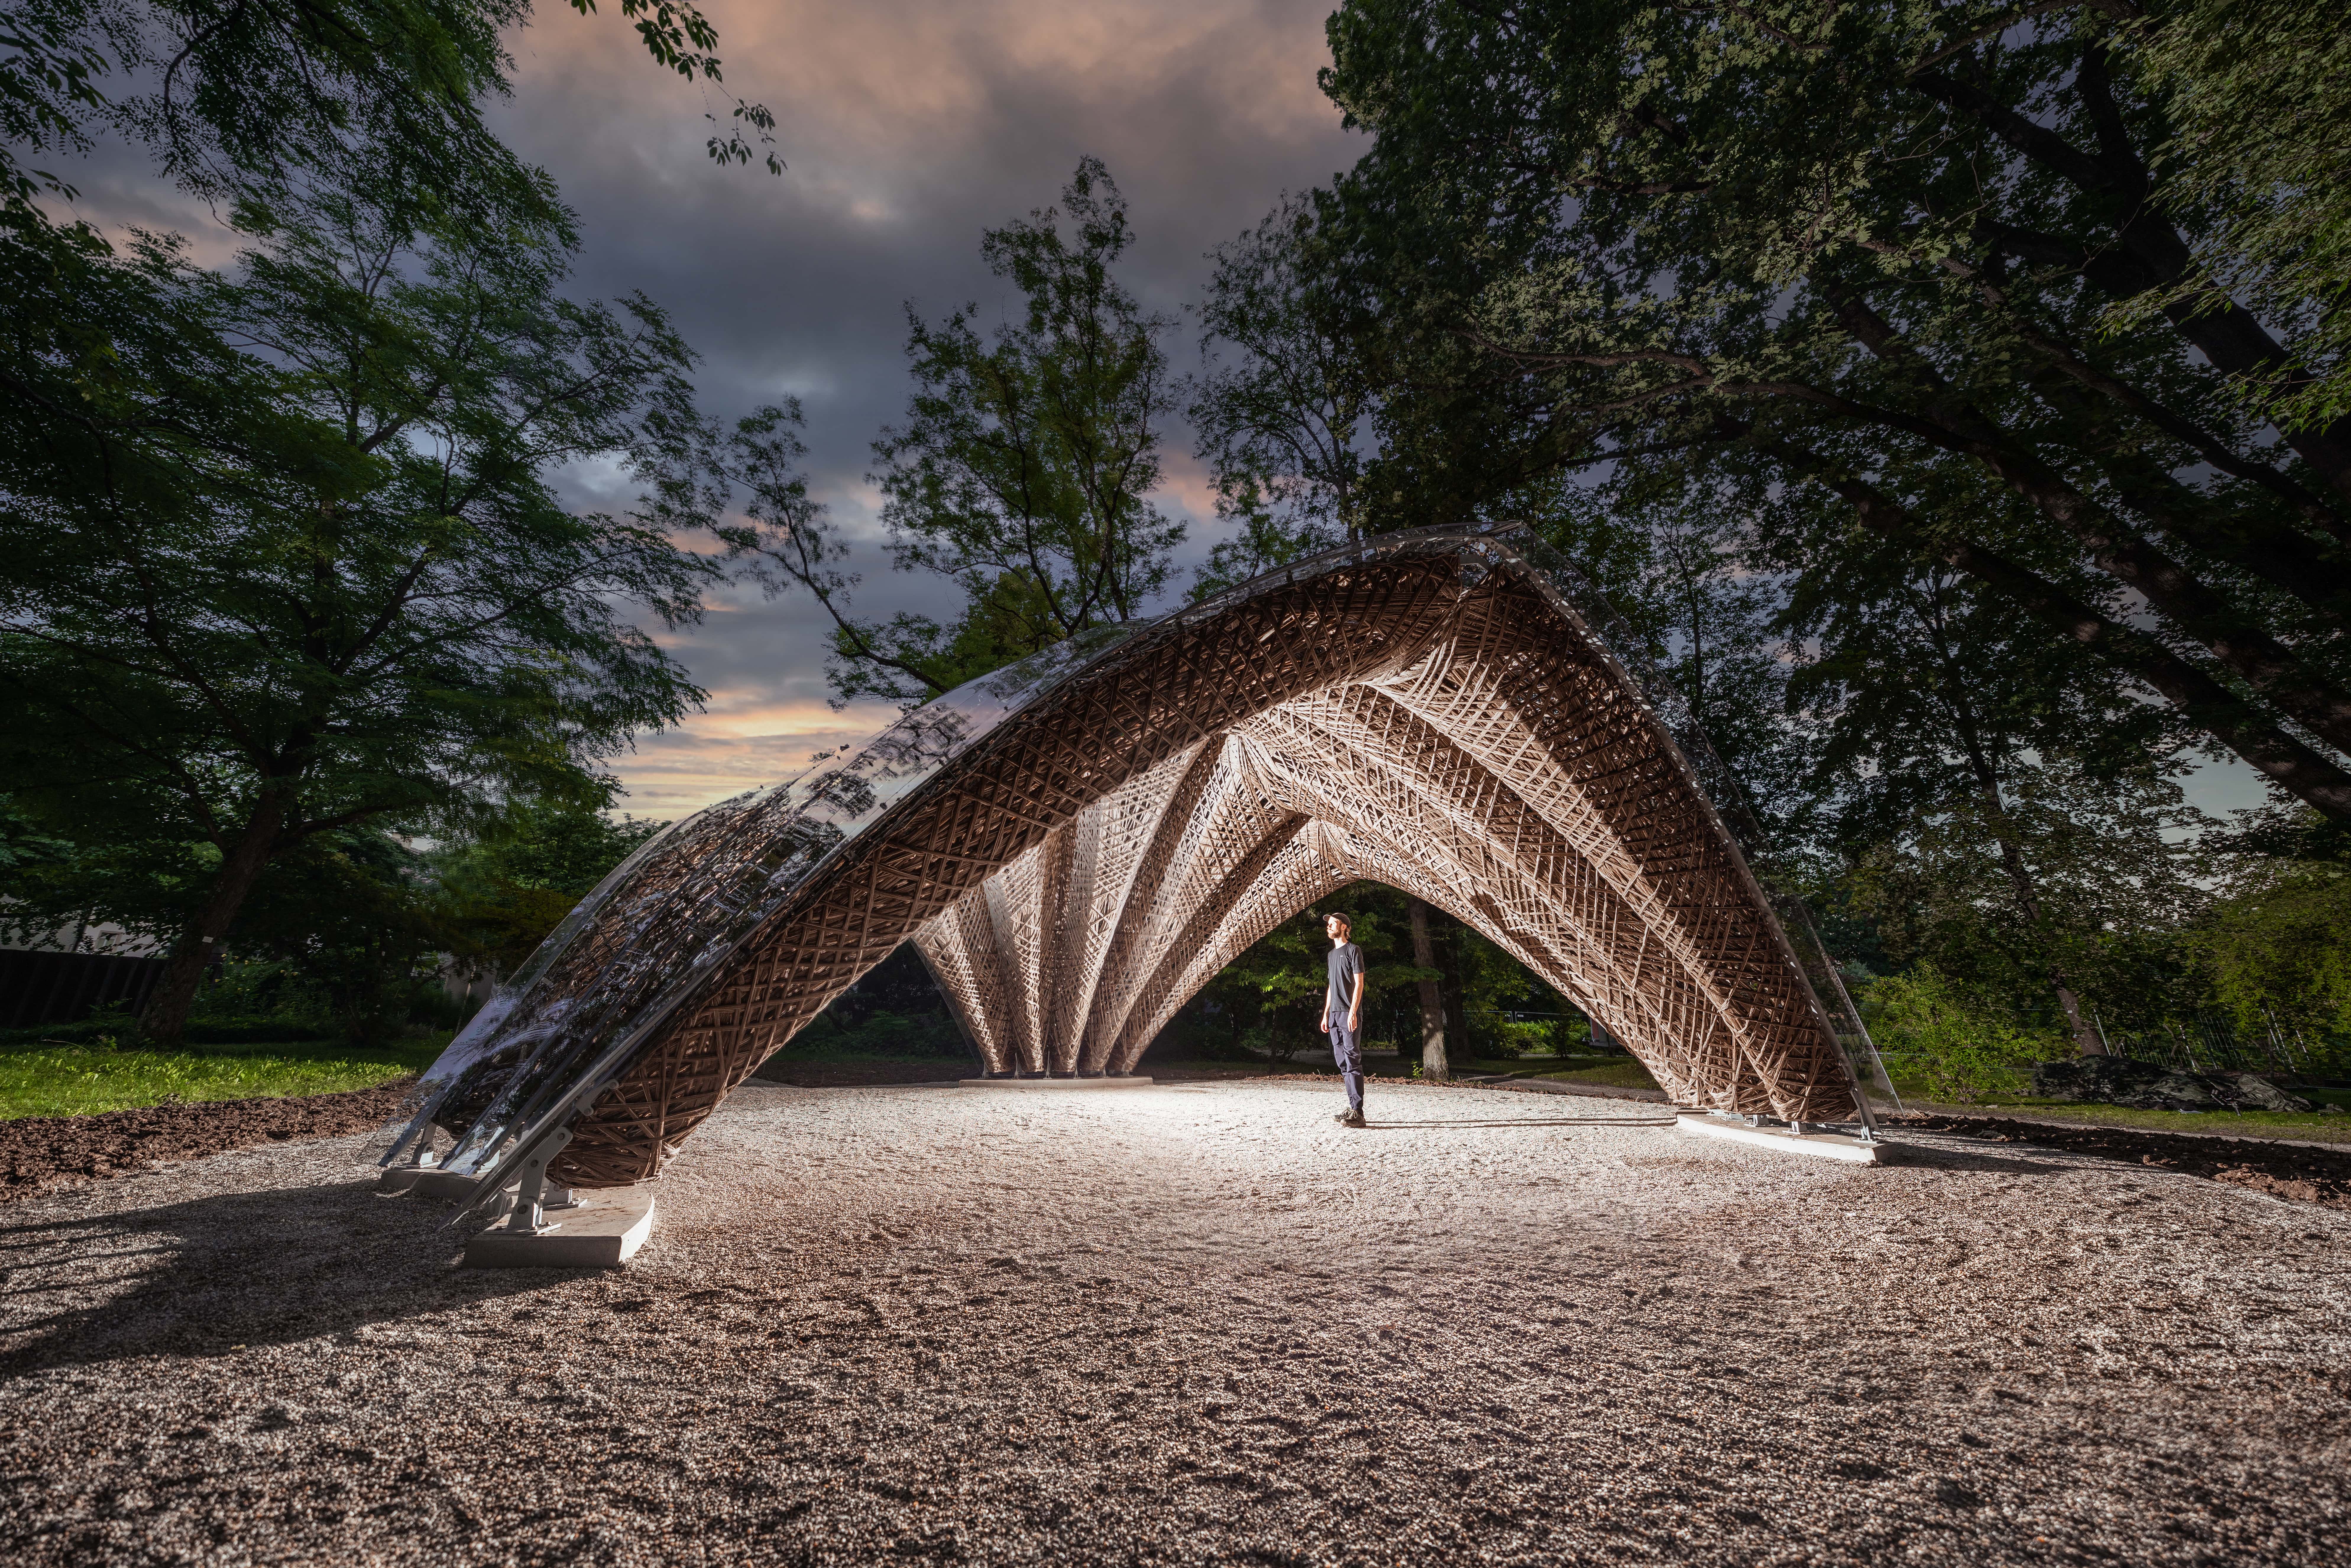 livMatS Pavilion: A Sopisthicated Building Using Natural Fibers